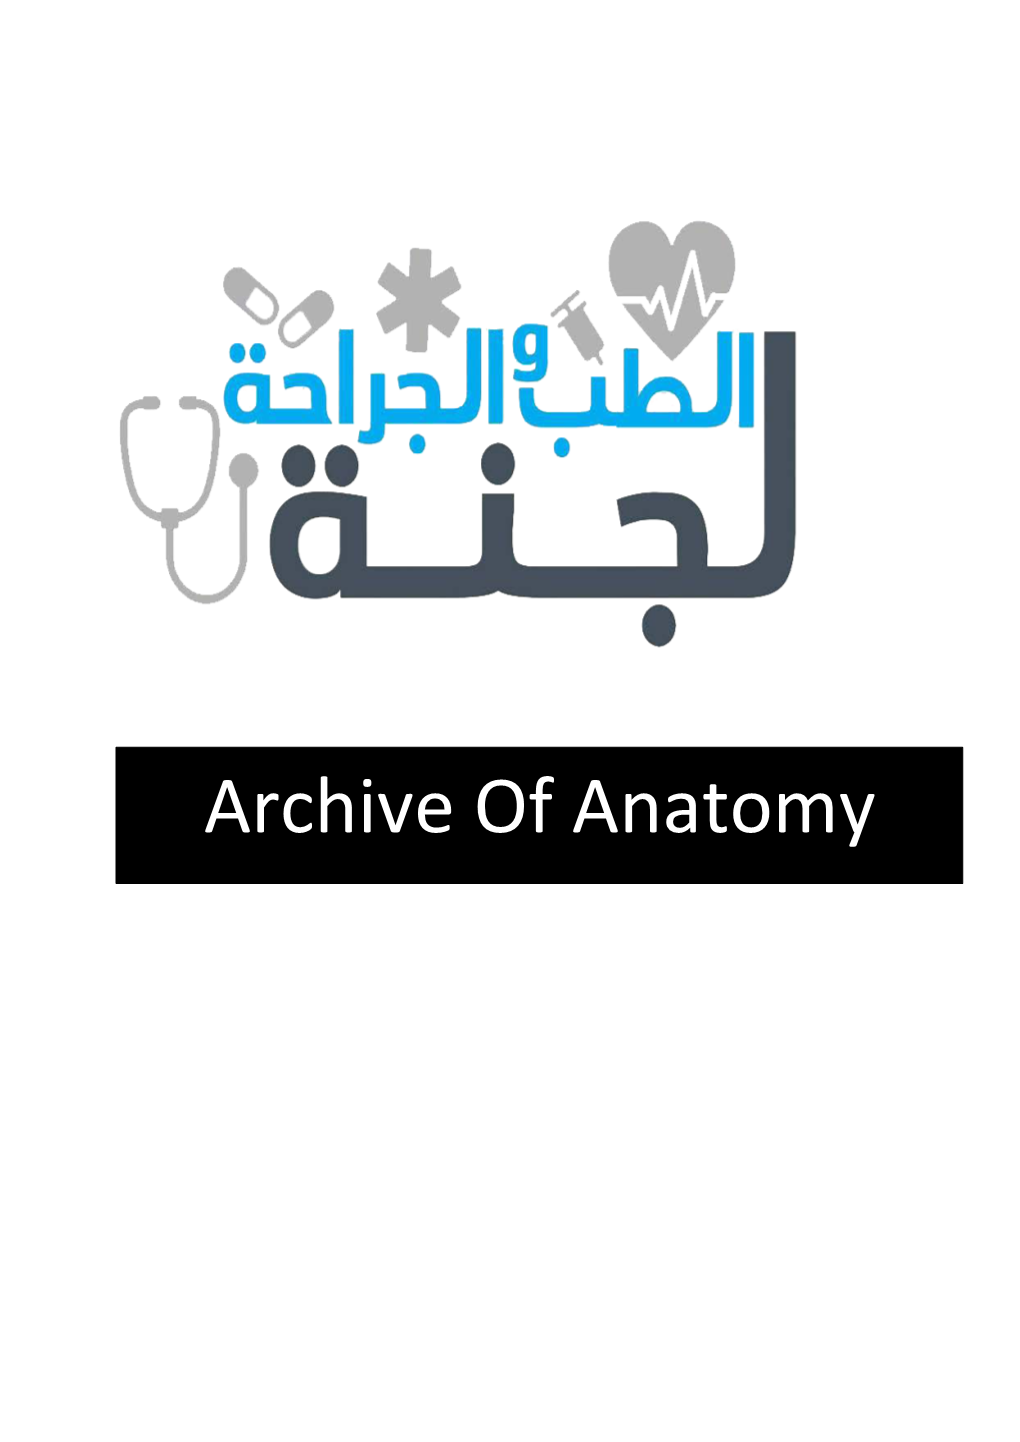 Archive of Anatomy